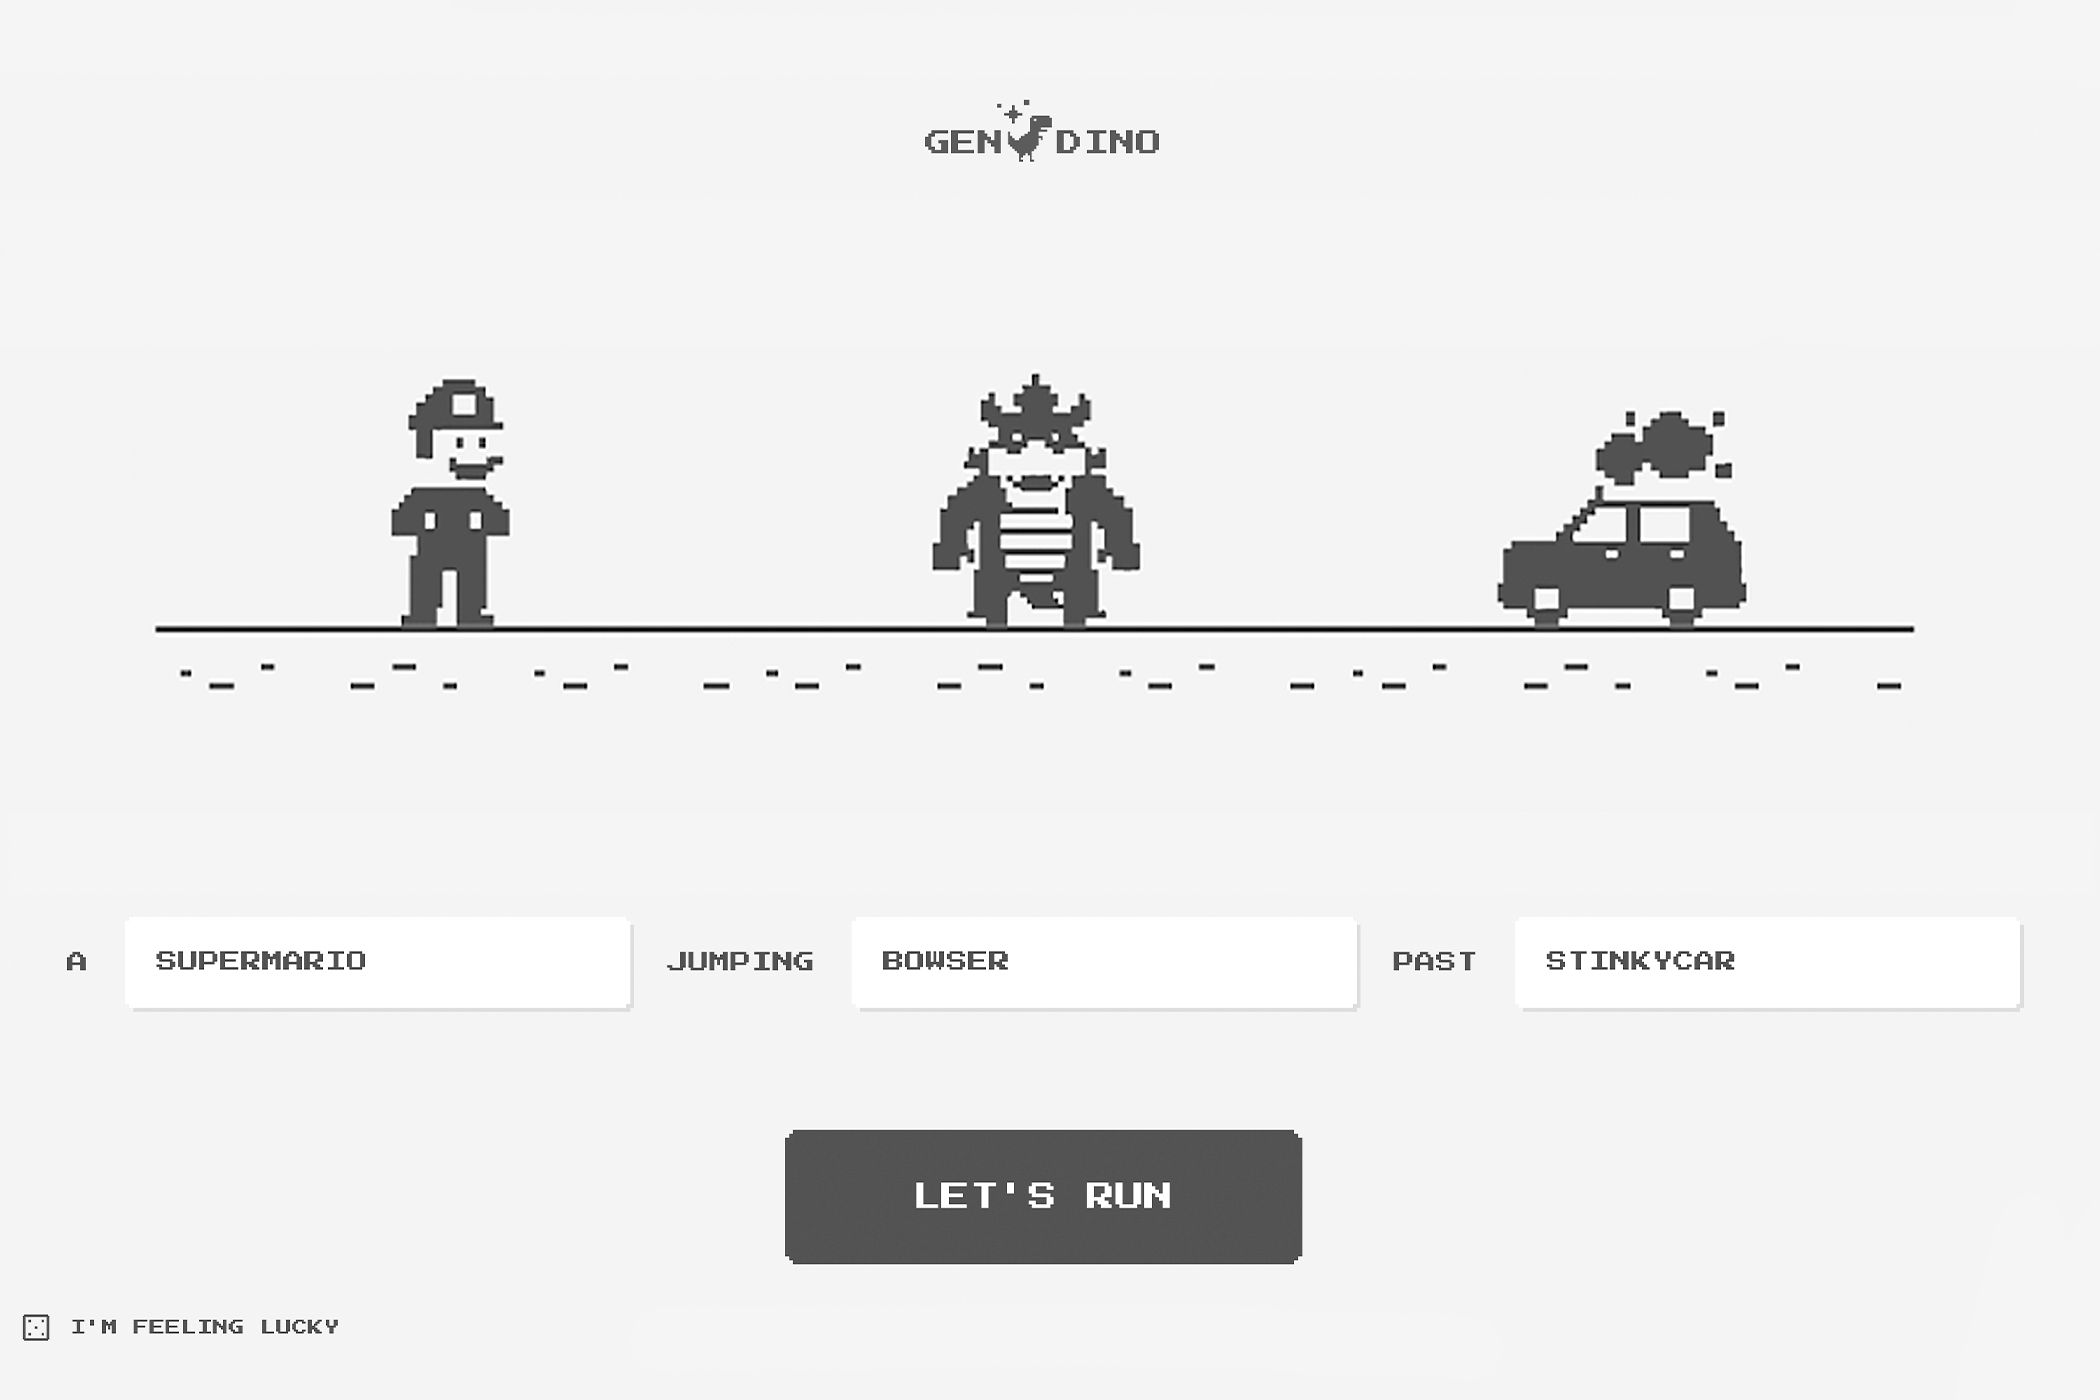 Generating Super Mario, Bowser, and a stinky car in Google Labs GenDino.